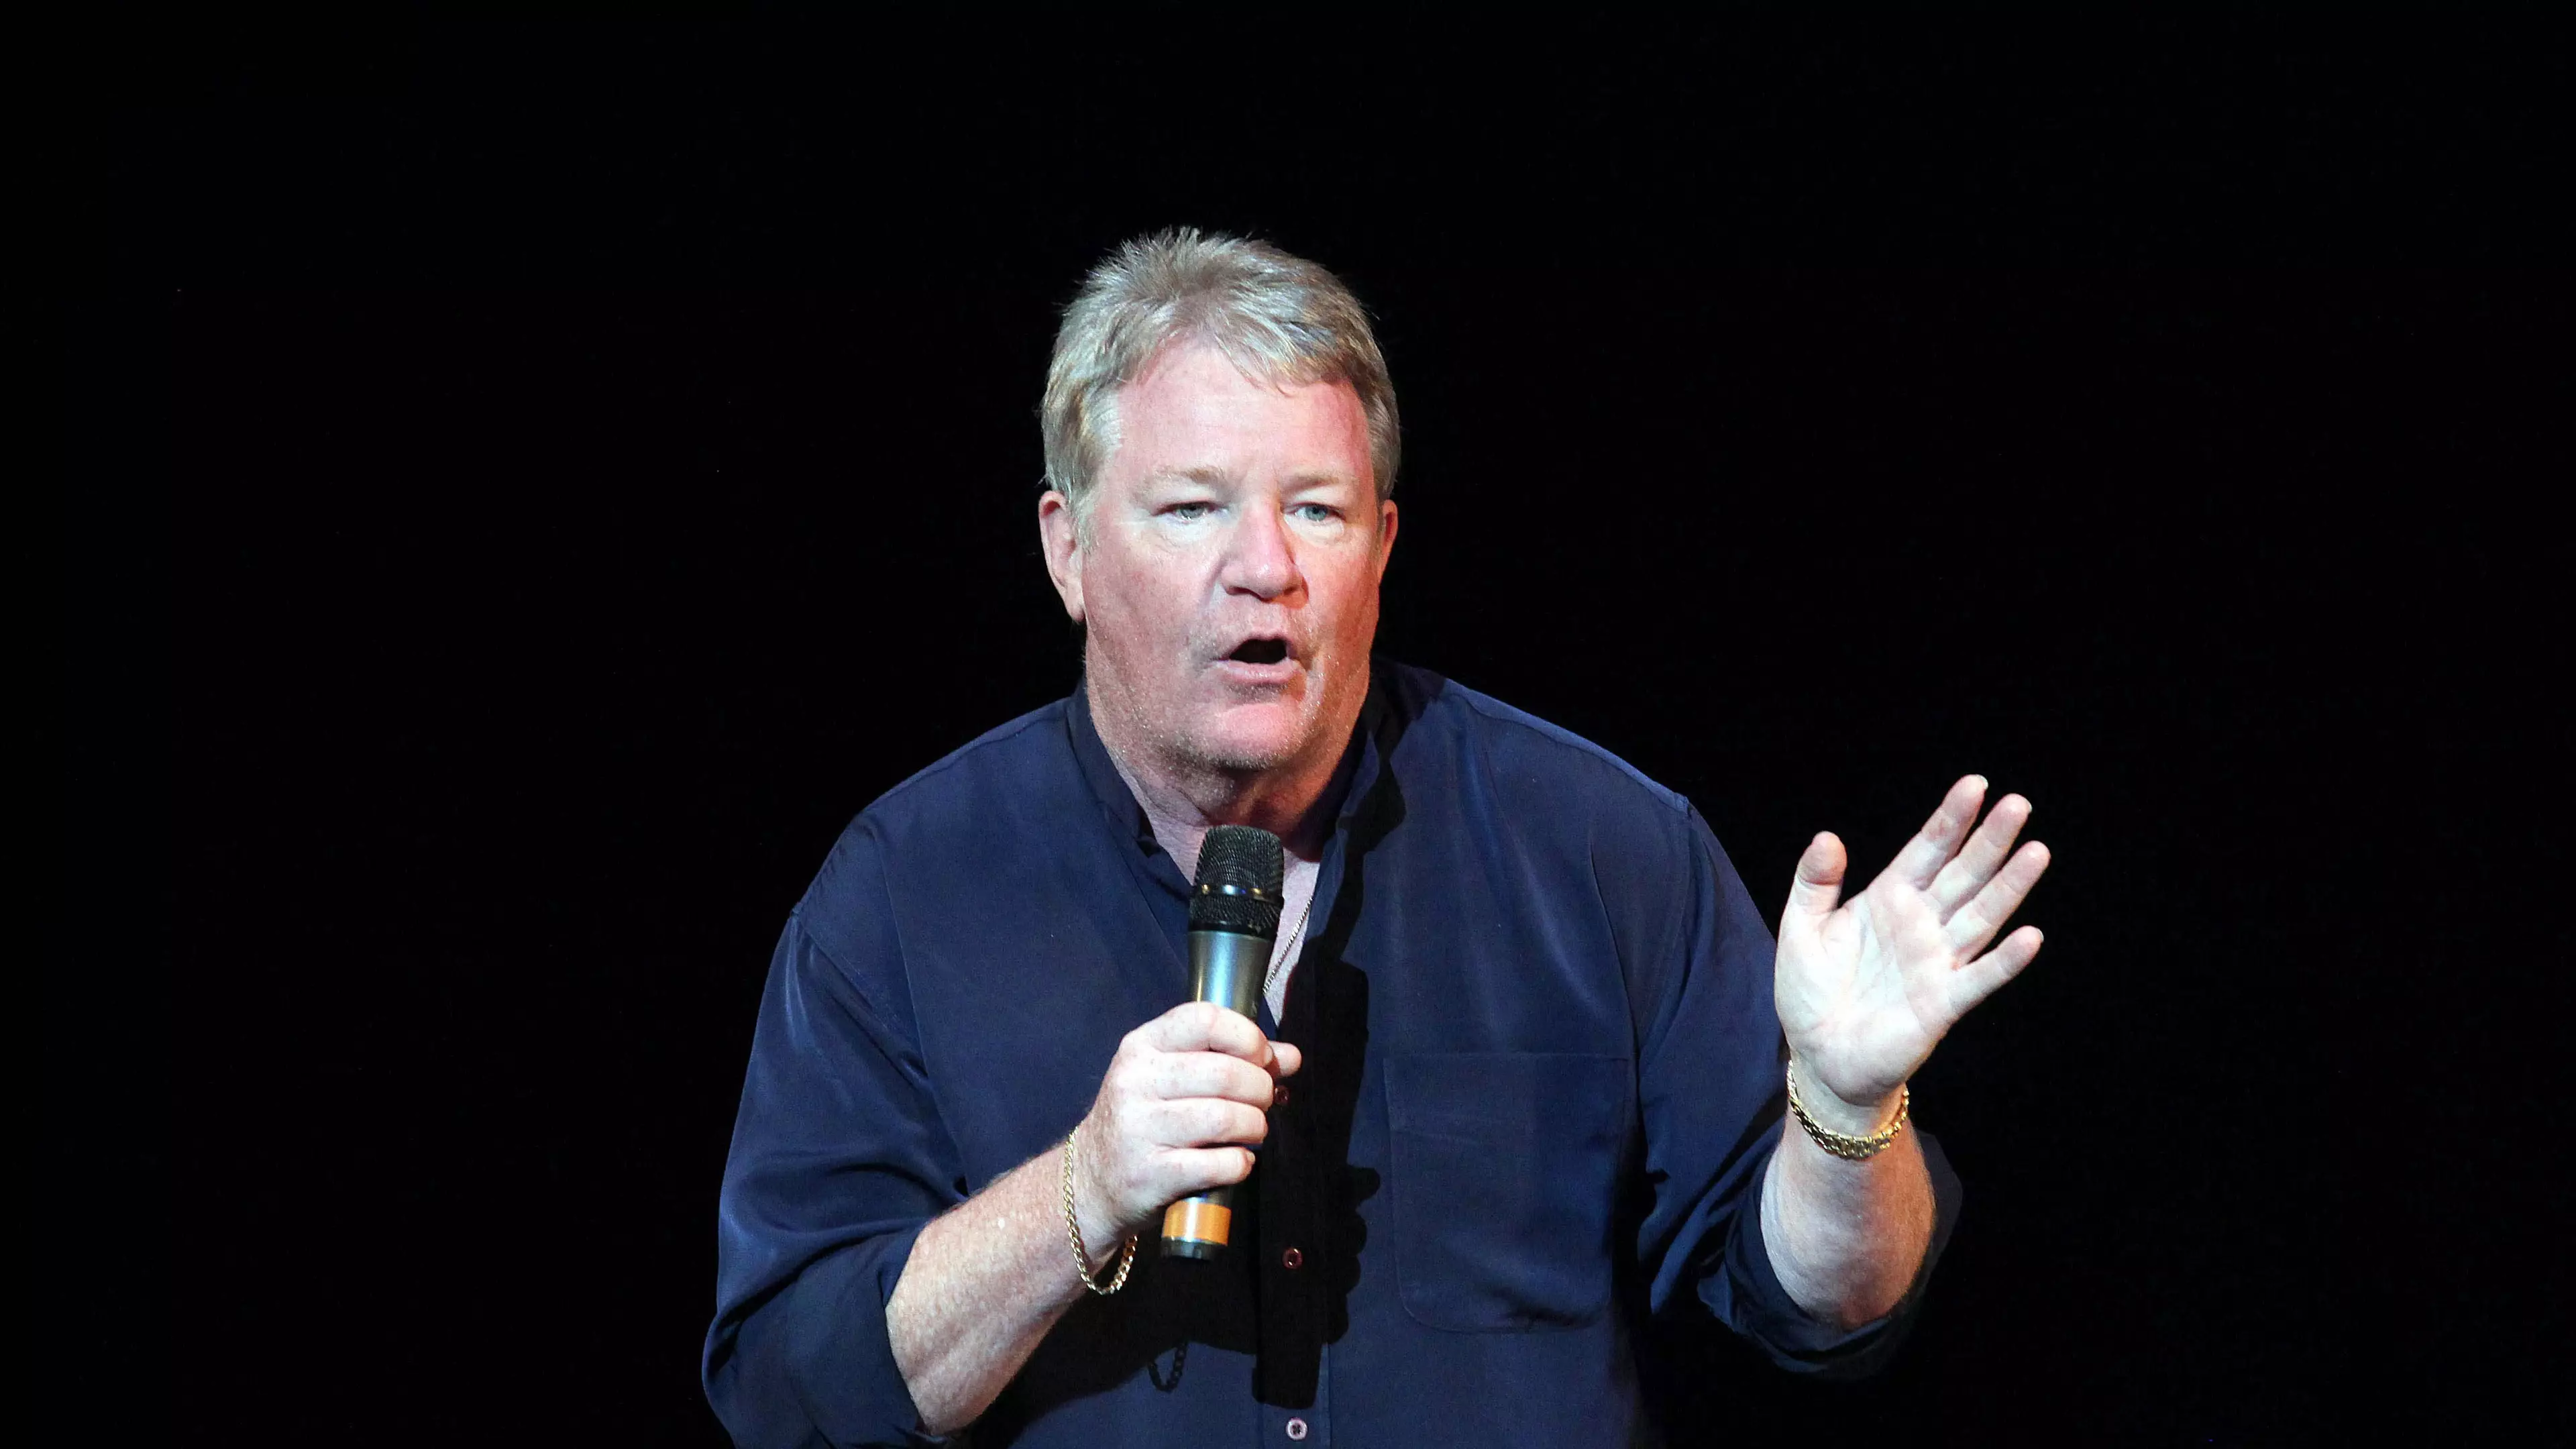 Jim Davidson Branded A 'Diva' and 'D***head' After Getting Into Spat With Barmaid